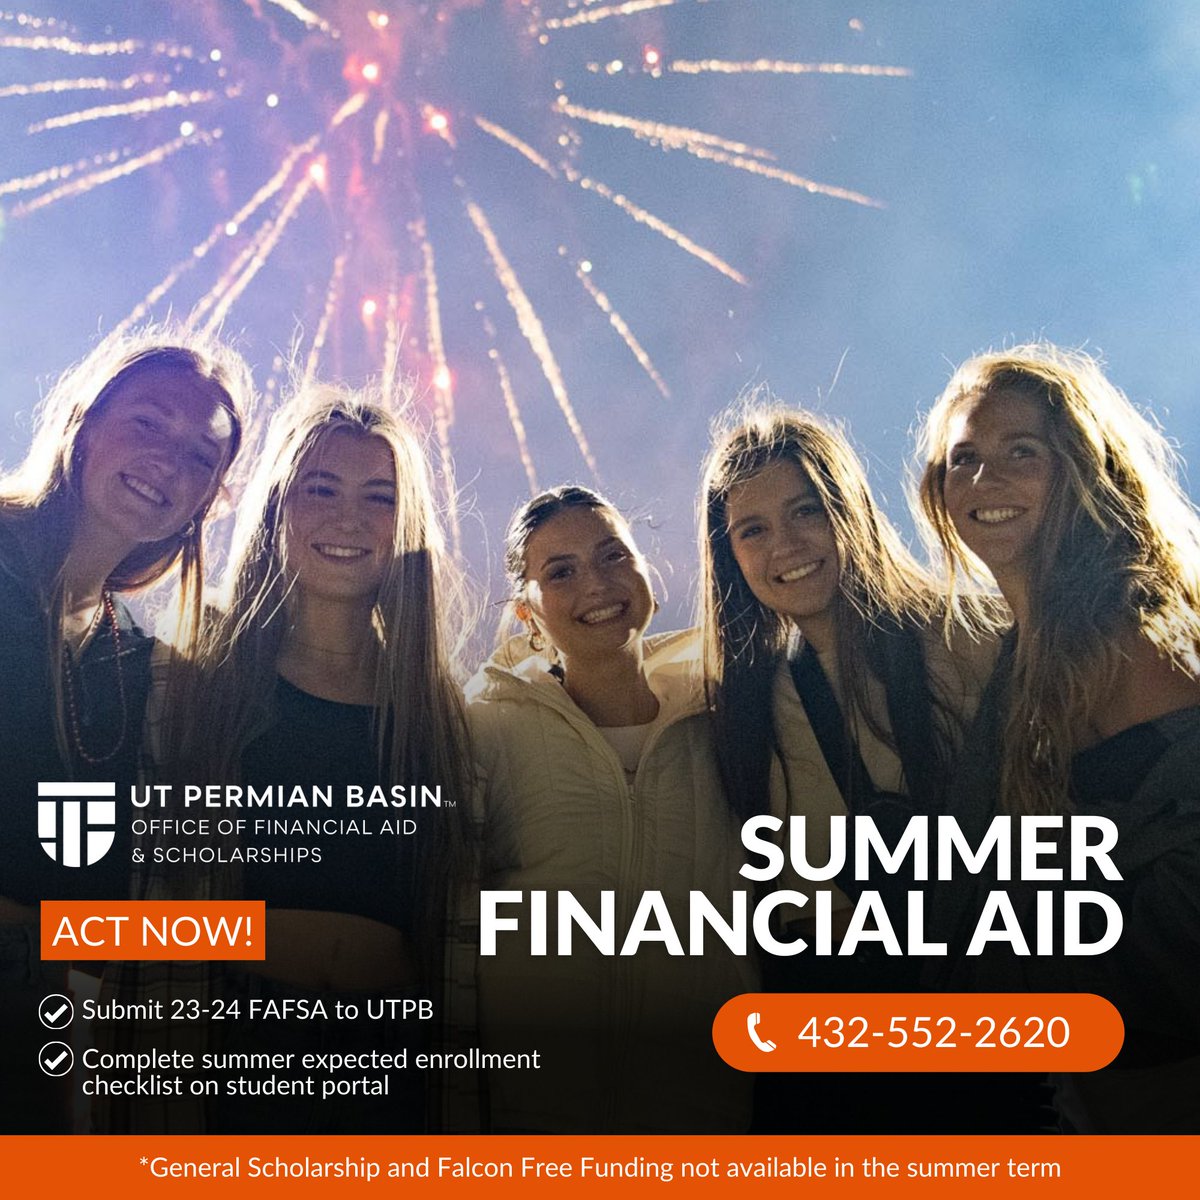 Summer financial aid disbursements have begun!
➡Summer 1= 5/13
➡Full Summer=6/3
➡Summer 2=7/1
Aid will disburse when the student begins the course that fulfills the hour requirement for their unique award. #utpb #falconsup